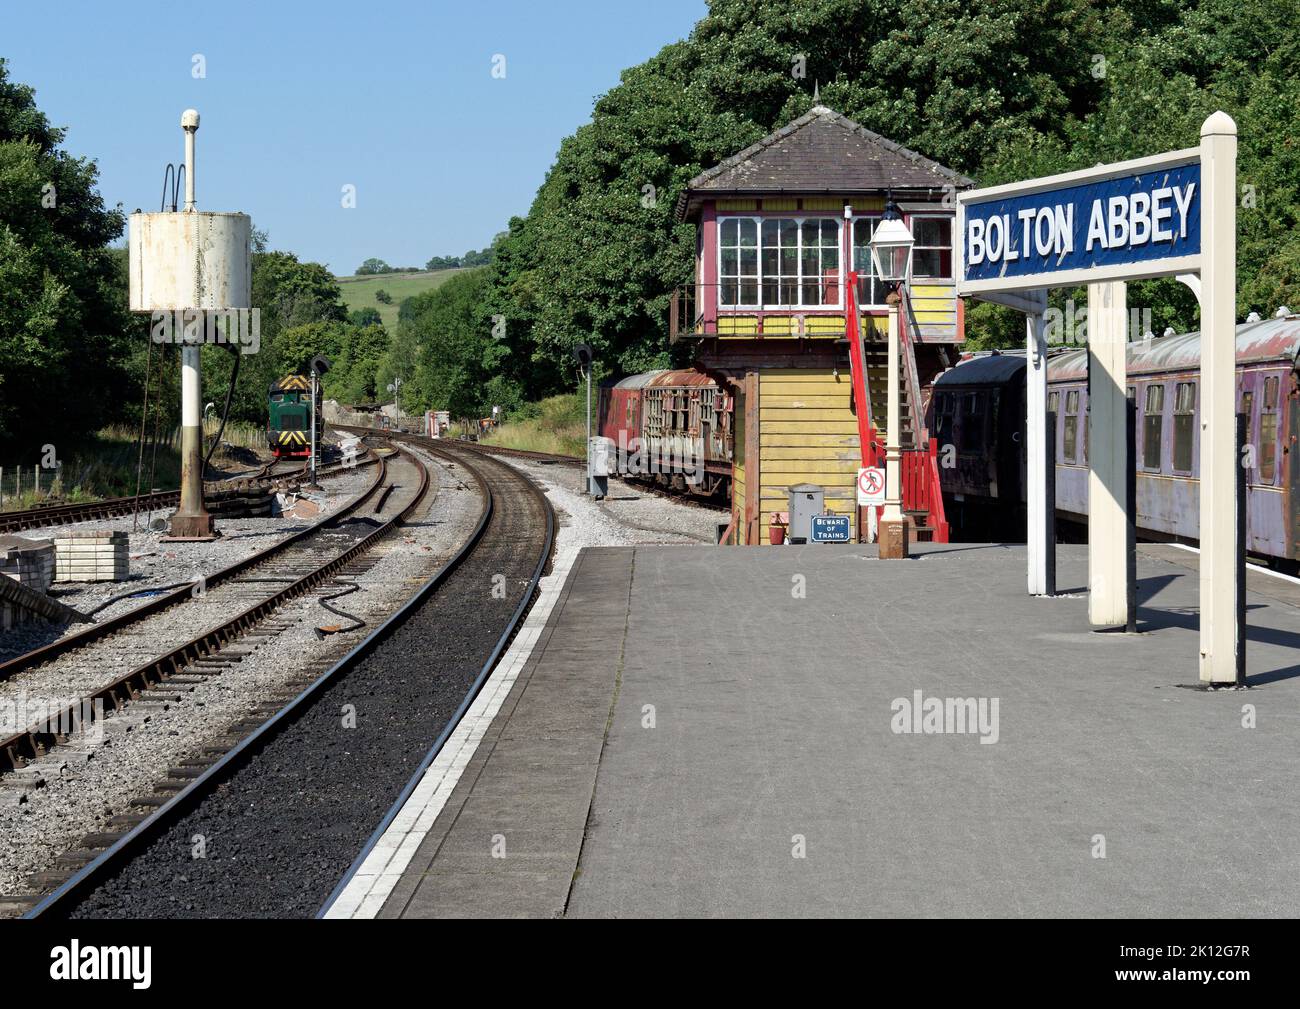 View up the line from the platform at Bolton Abbey station on the Embsay & Bolton Abbey heritage railway showing signal box and water tank. Stock Photo